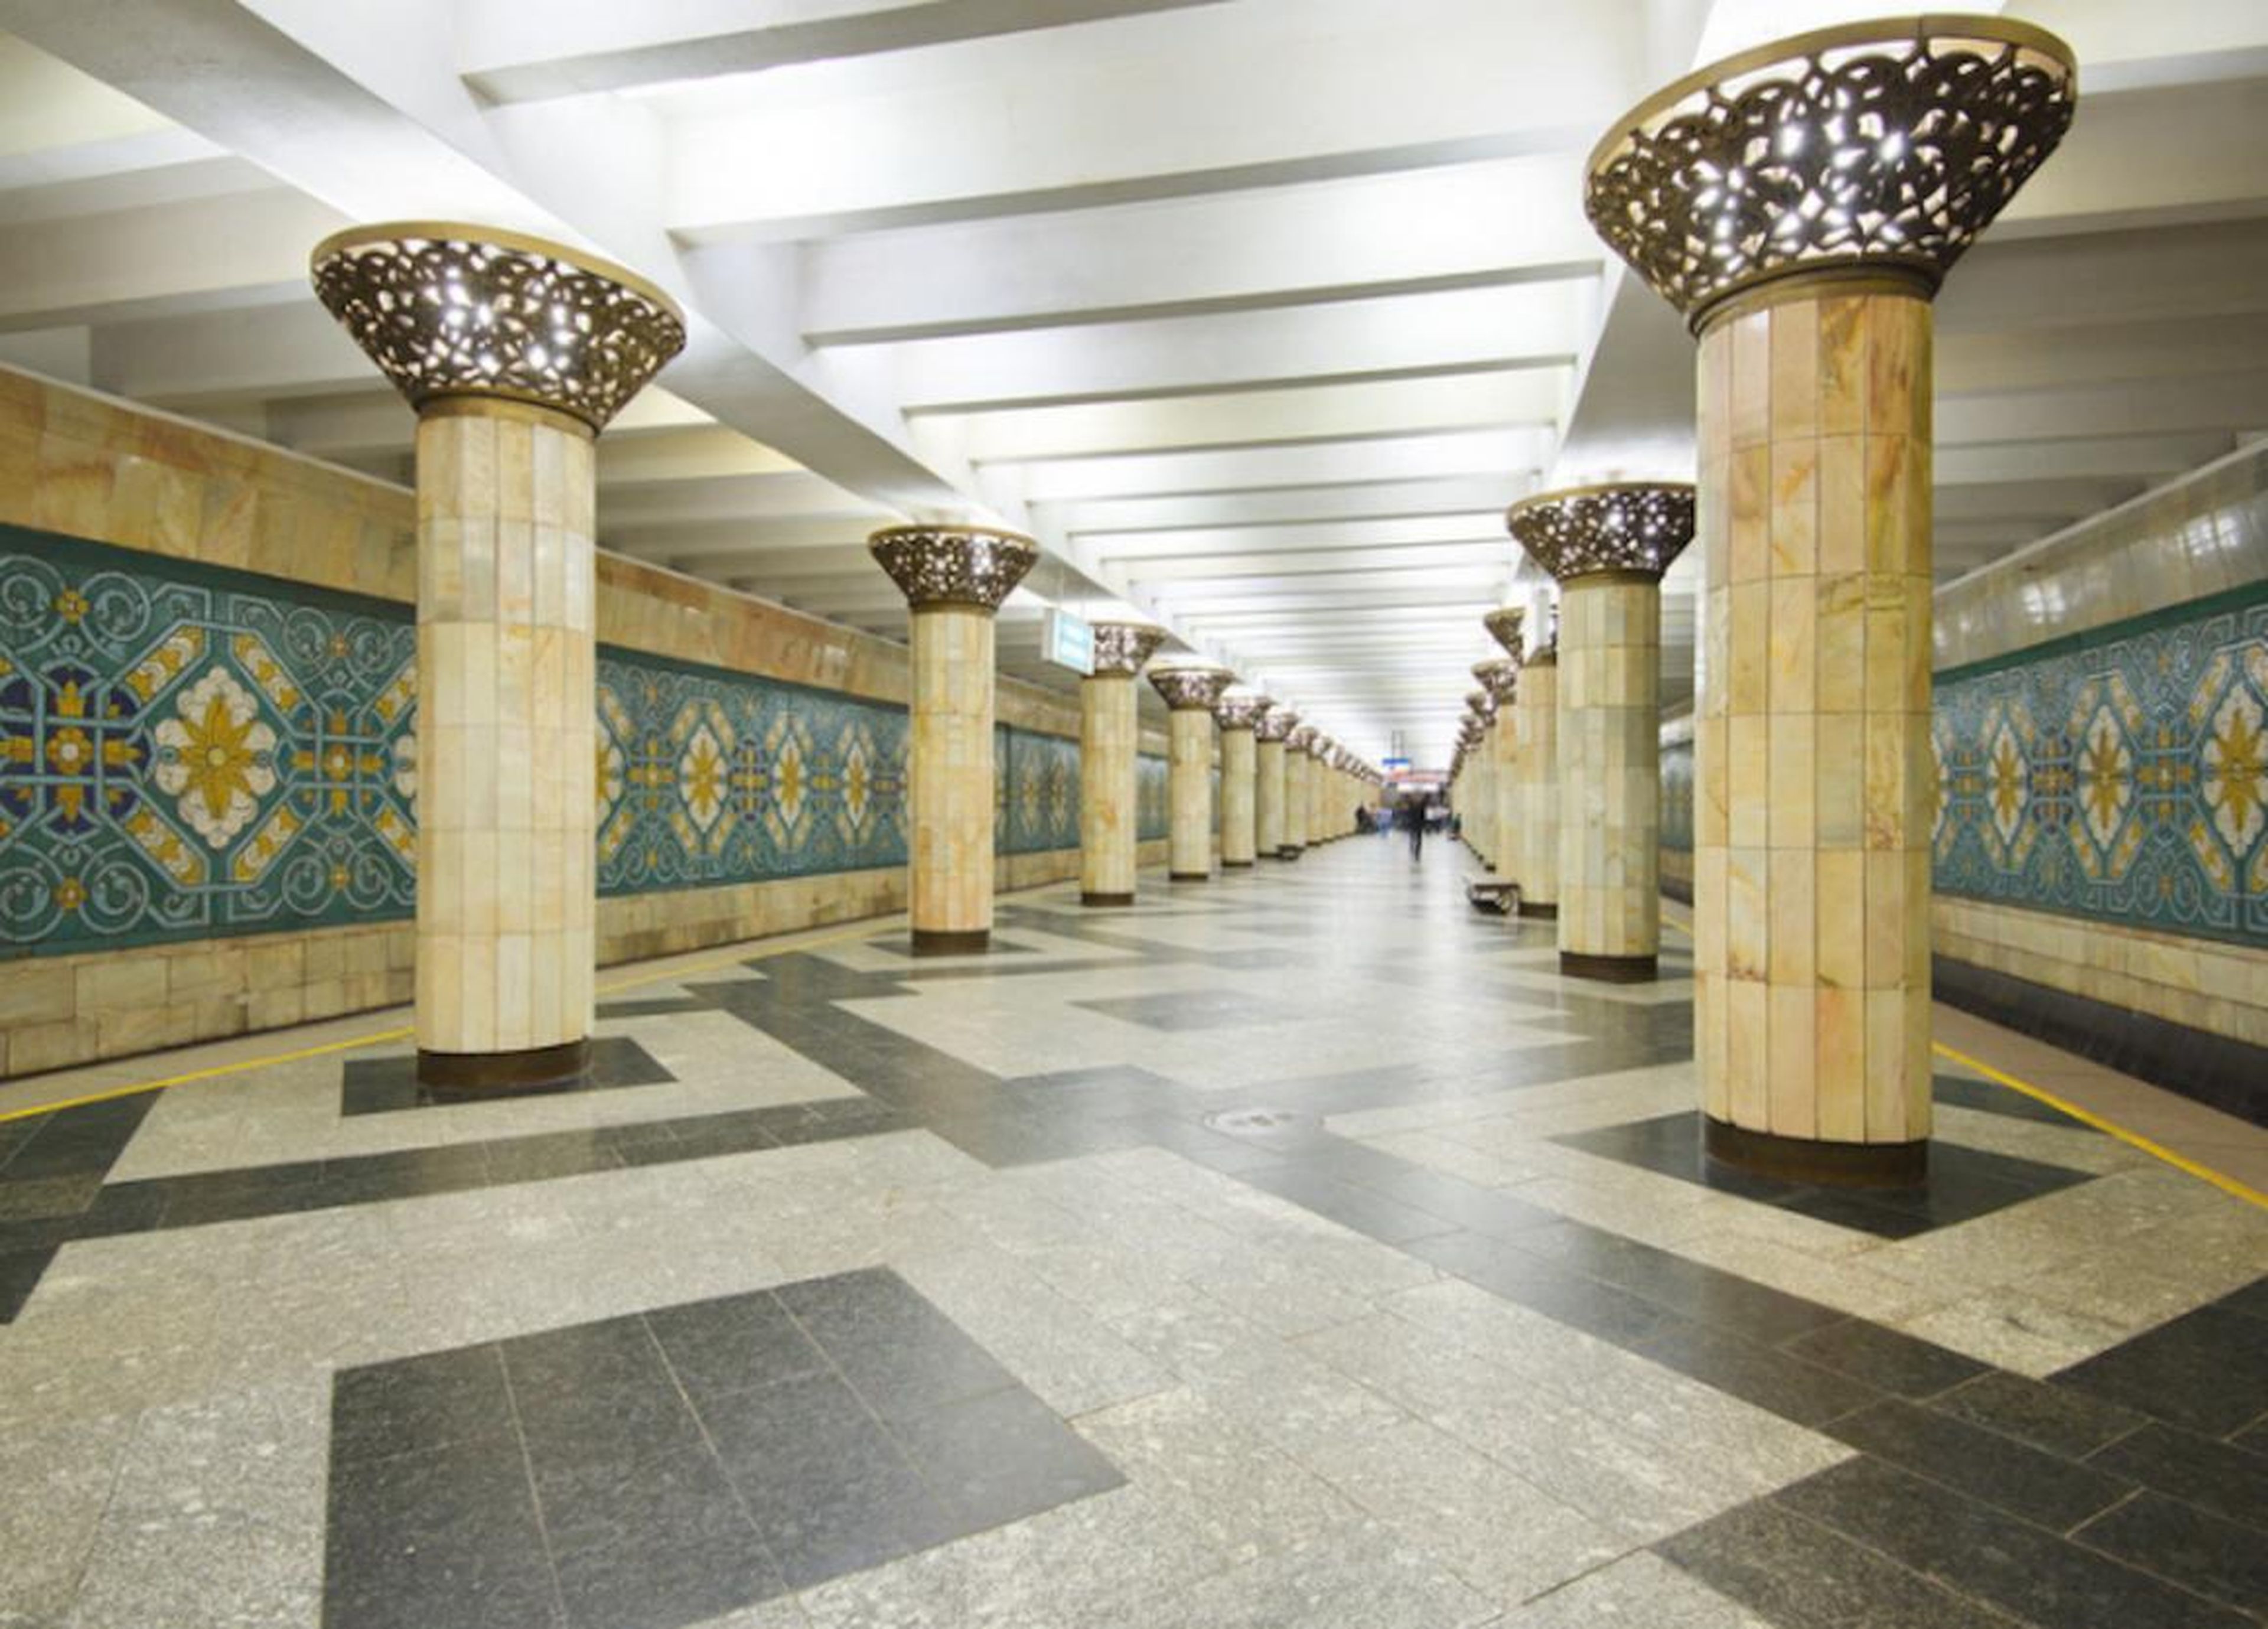 Lots of the stations have themes. The Pakhtakor Station's columns resemble foliage and it has mosaics of cotton balls in a reference to the country's cotton picking industry.